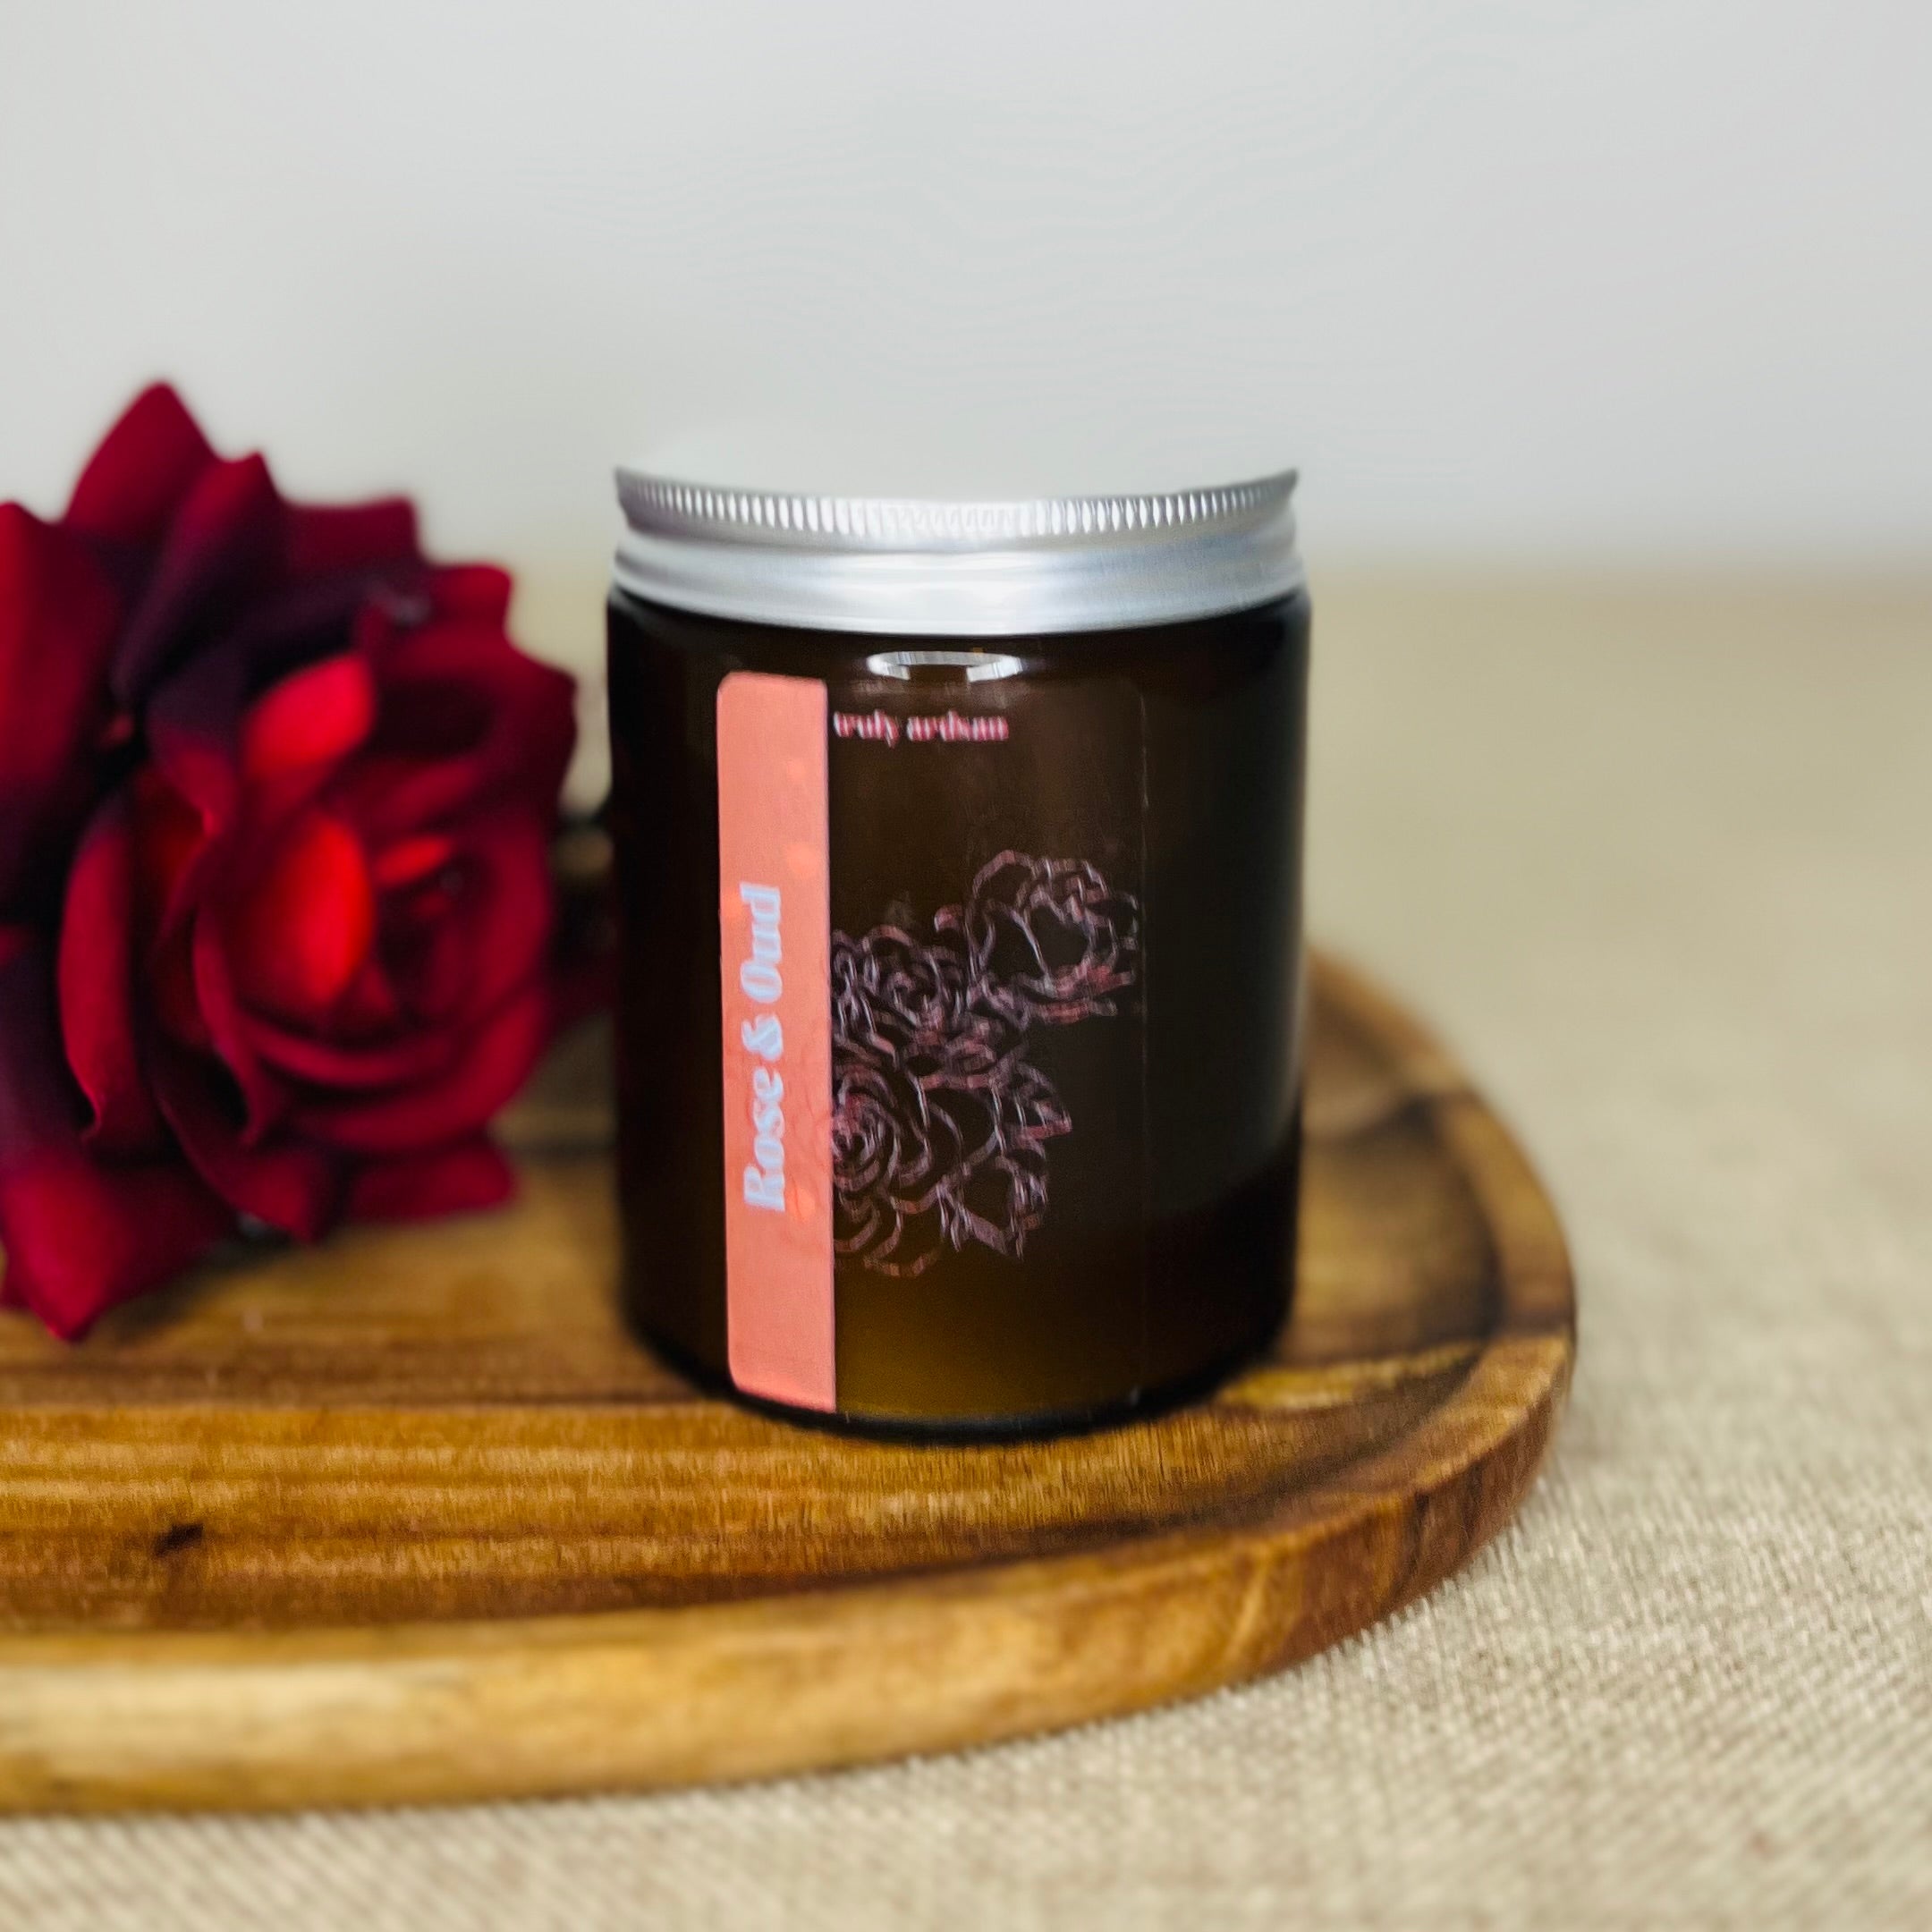 truly artisan rose and oud valentines candle manchester